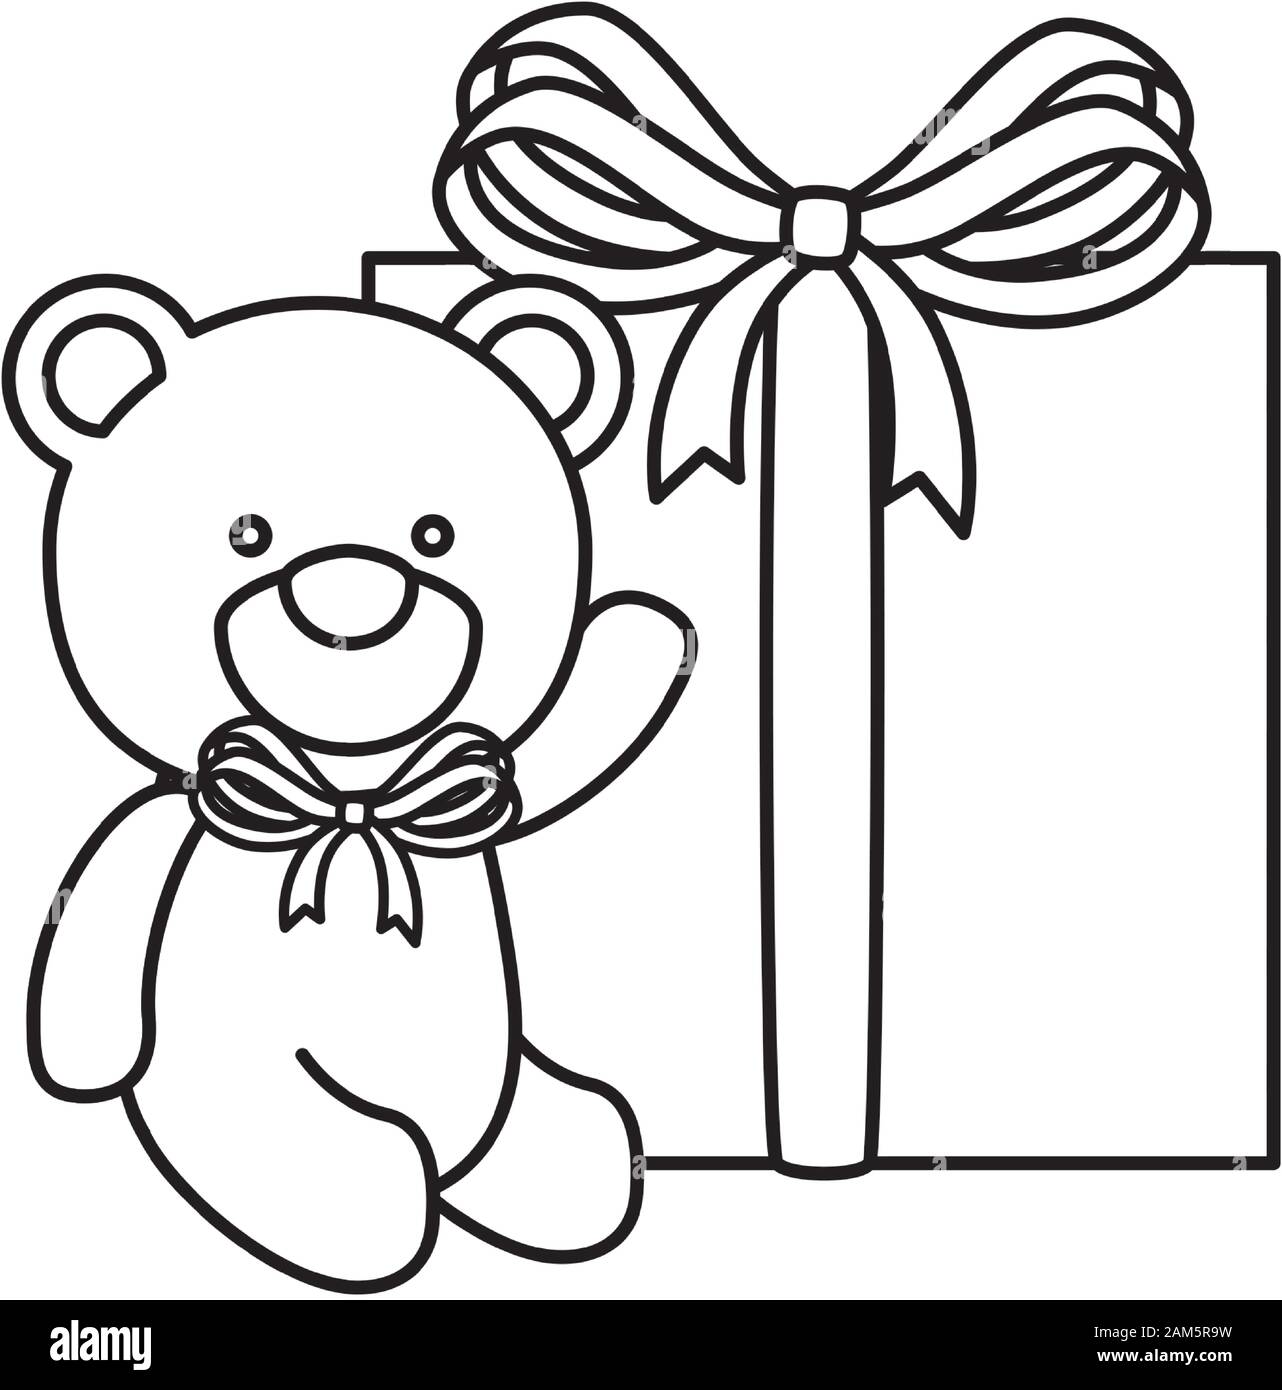 cute teddy bear with gift box isolated icon Stock Vector